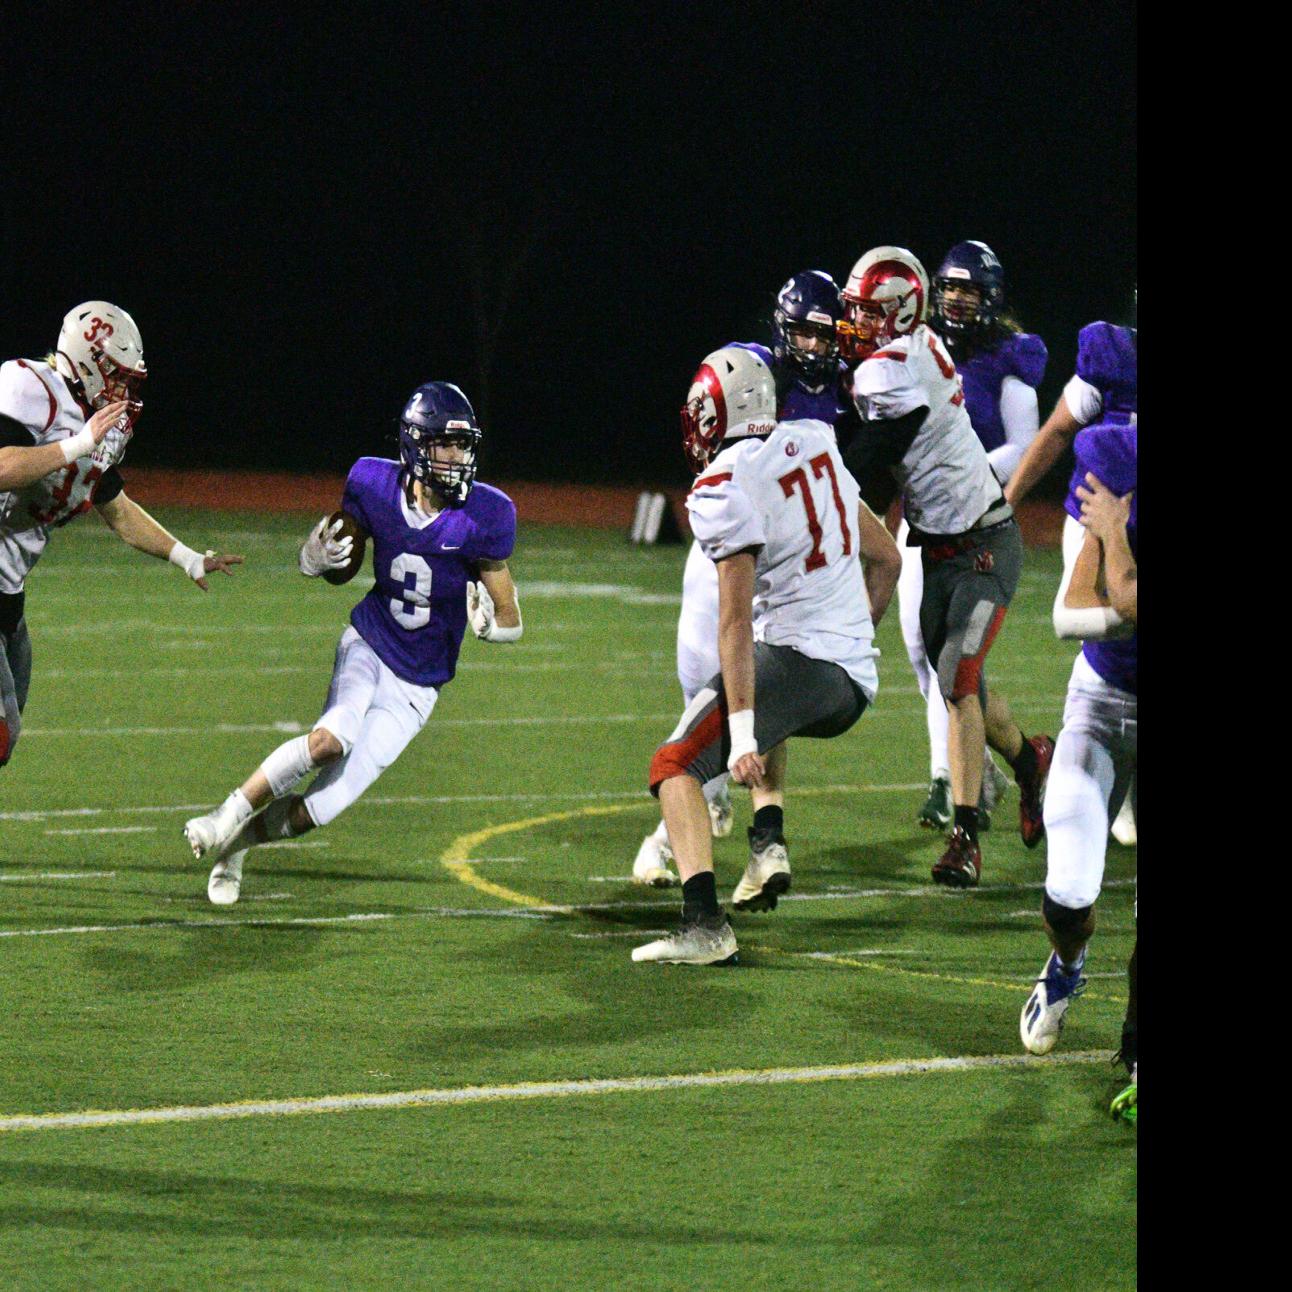 Sehome downs Nooksack Valley for 13th win